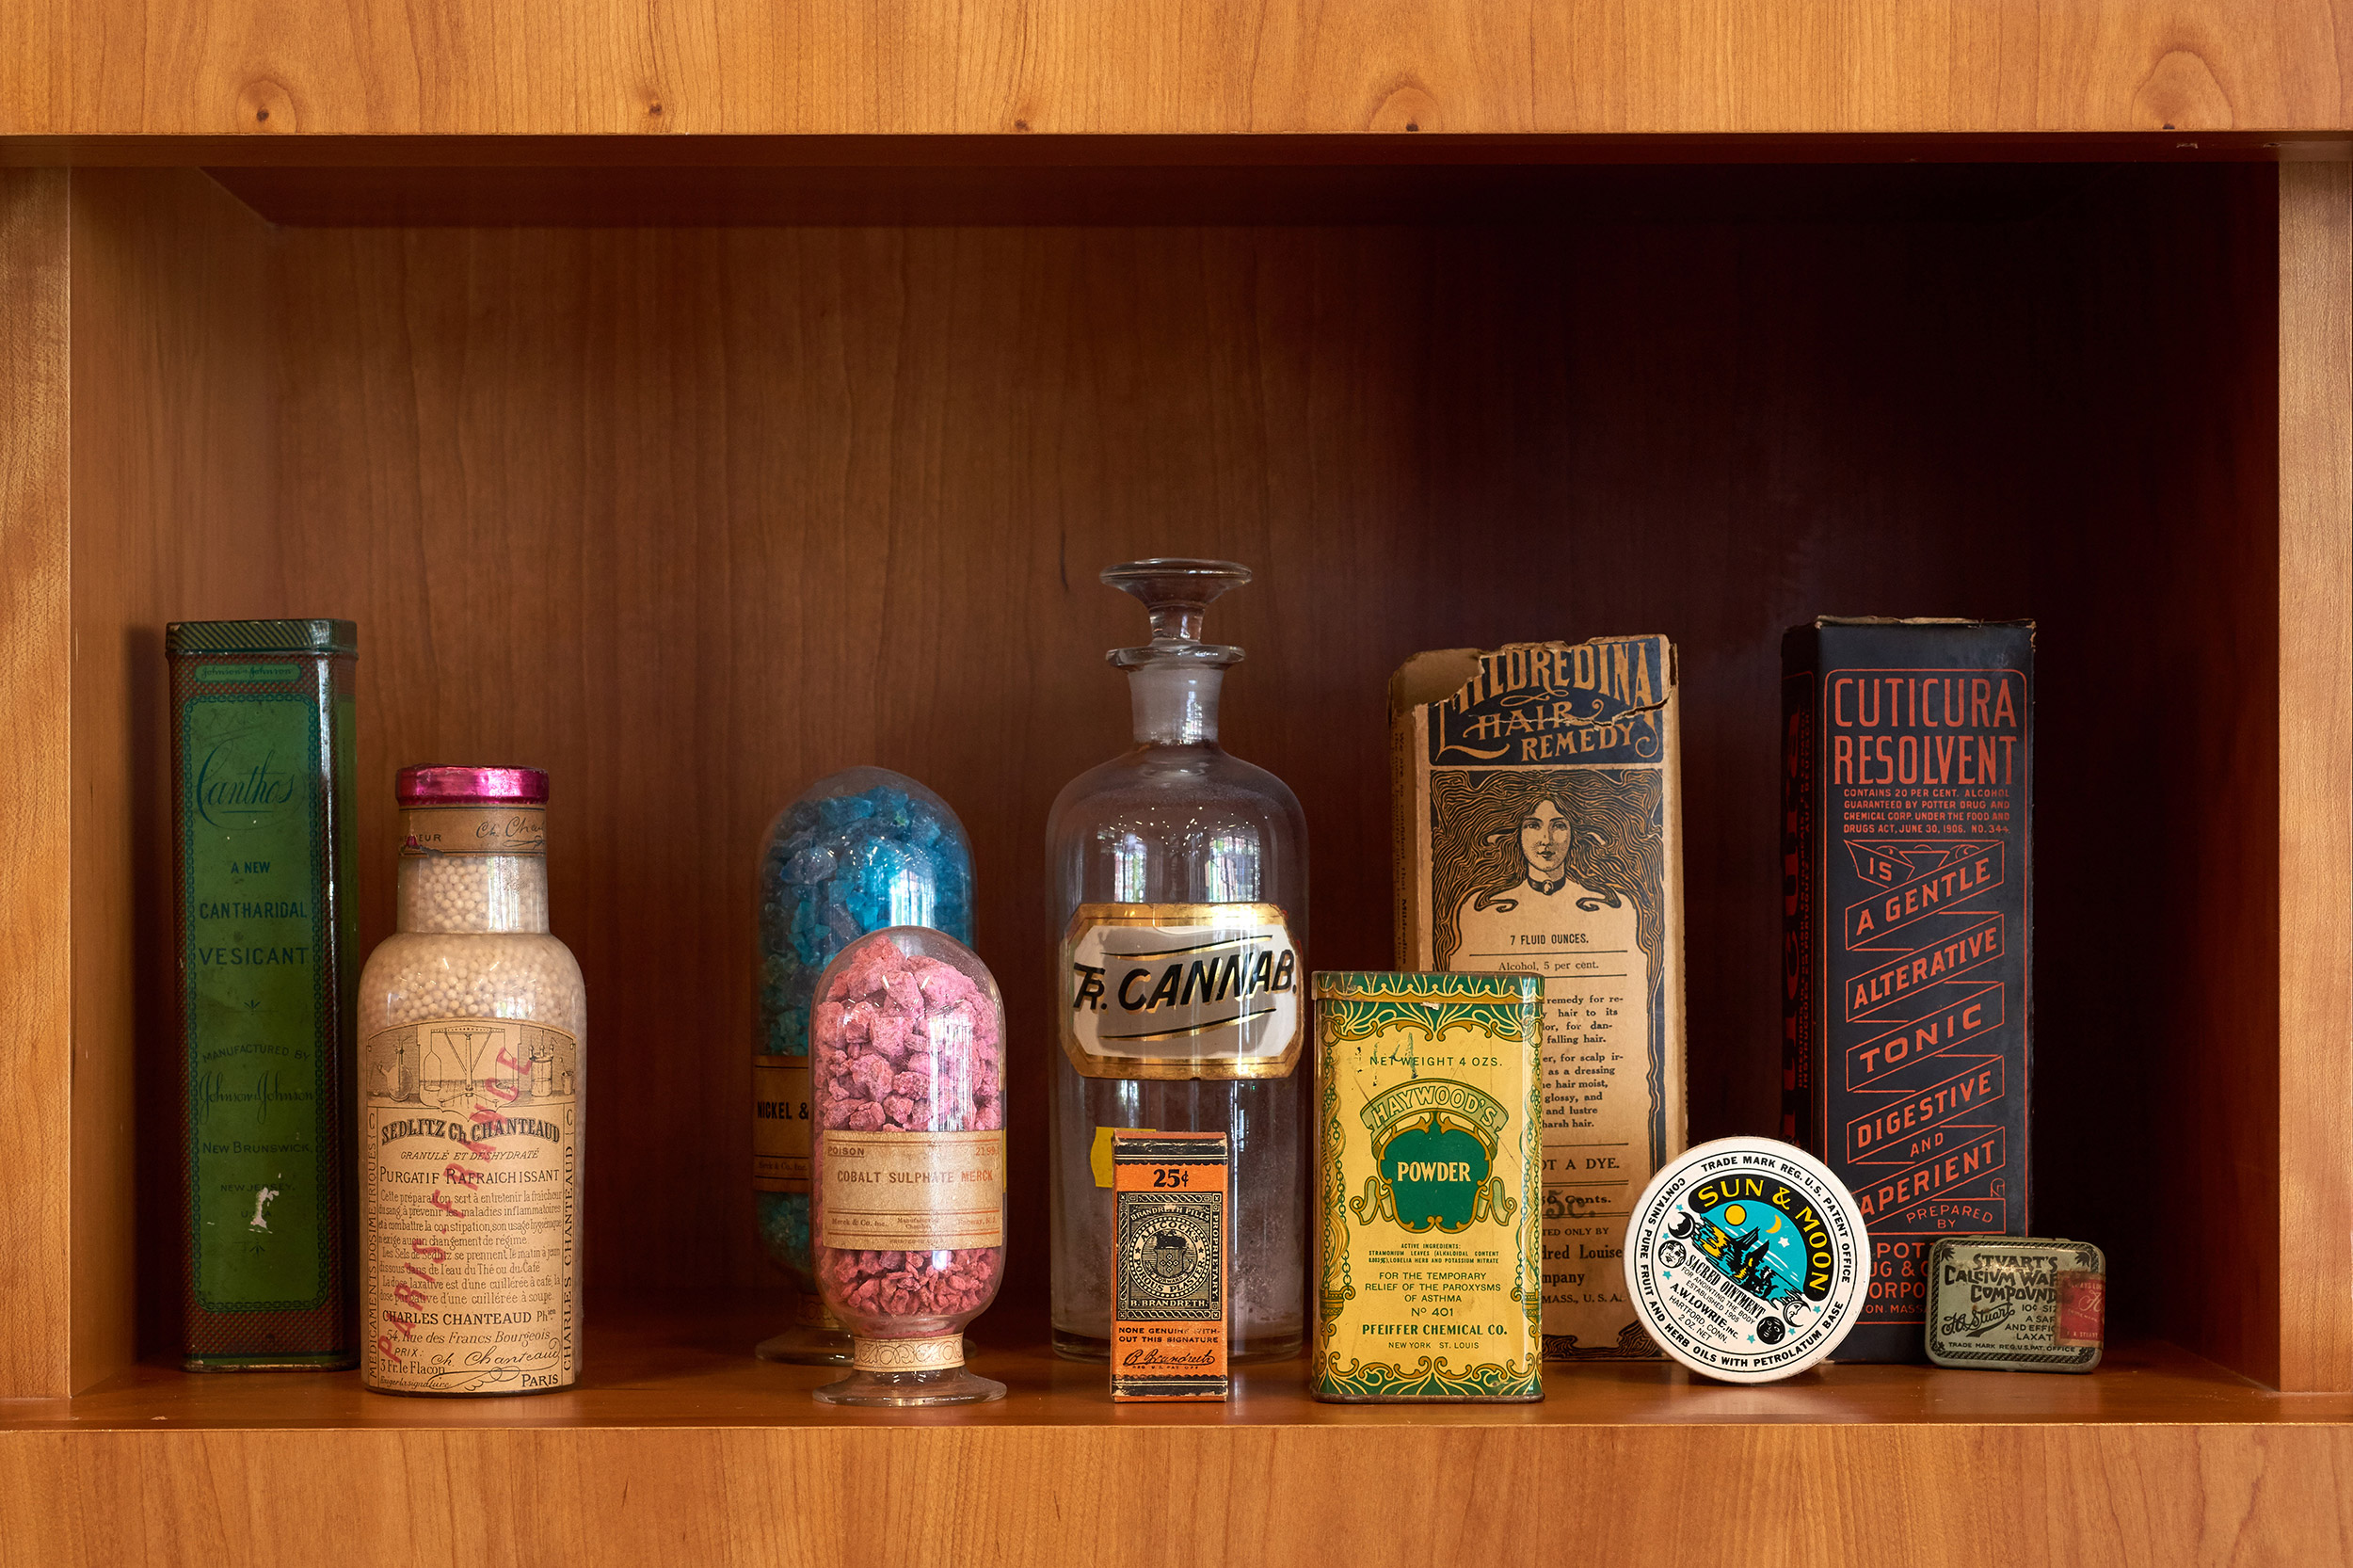 tintures and bottles sit inside a wooden cabinet